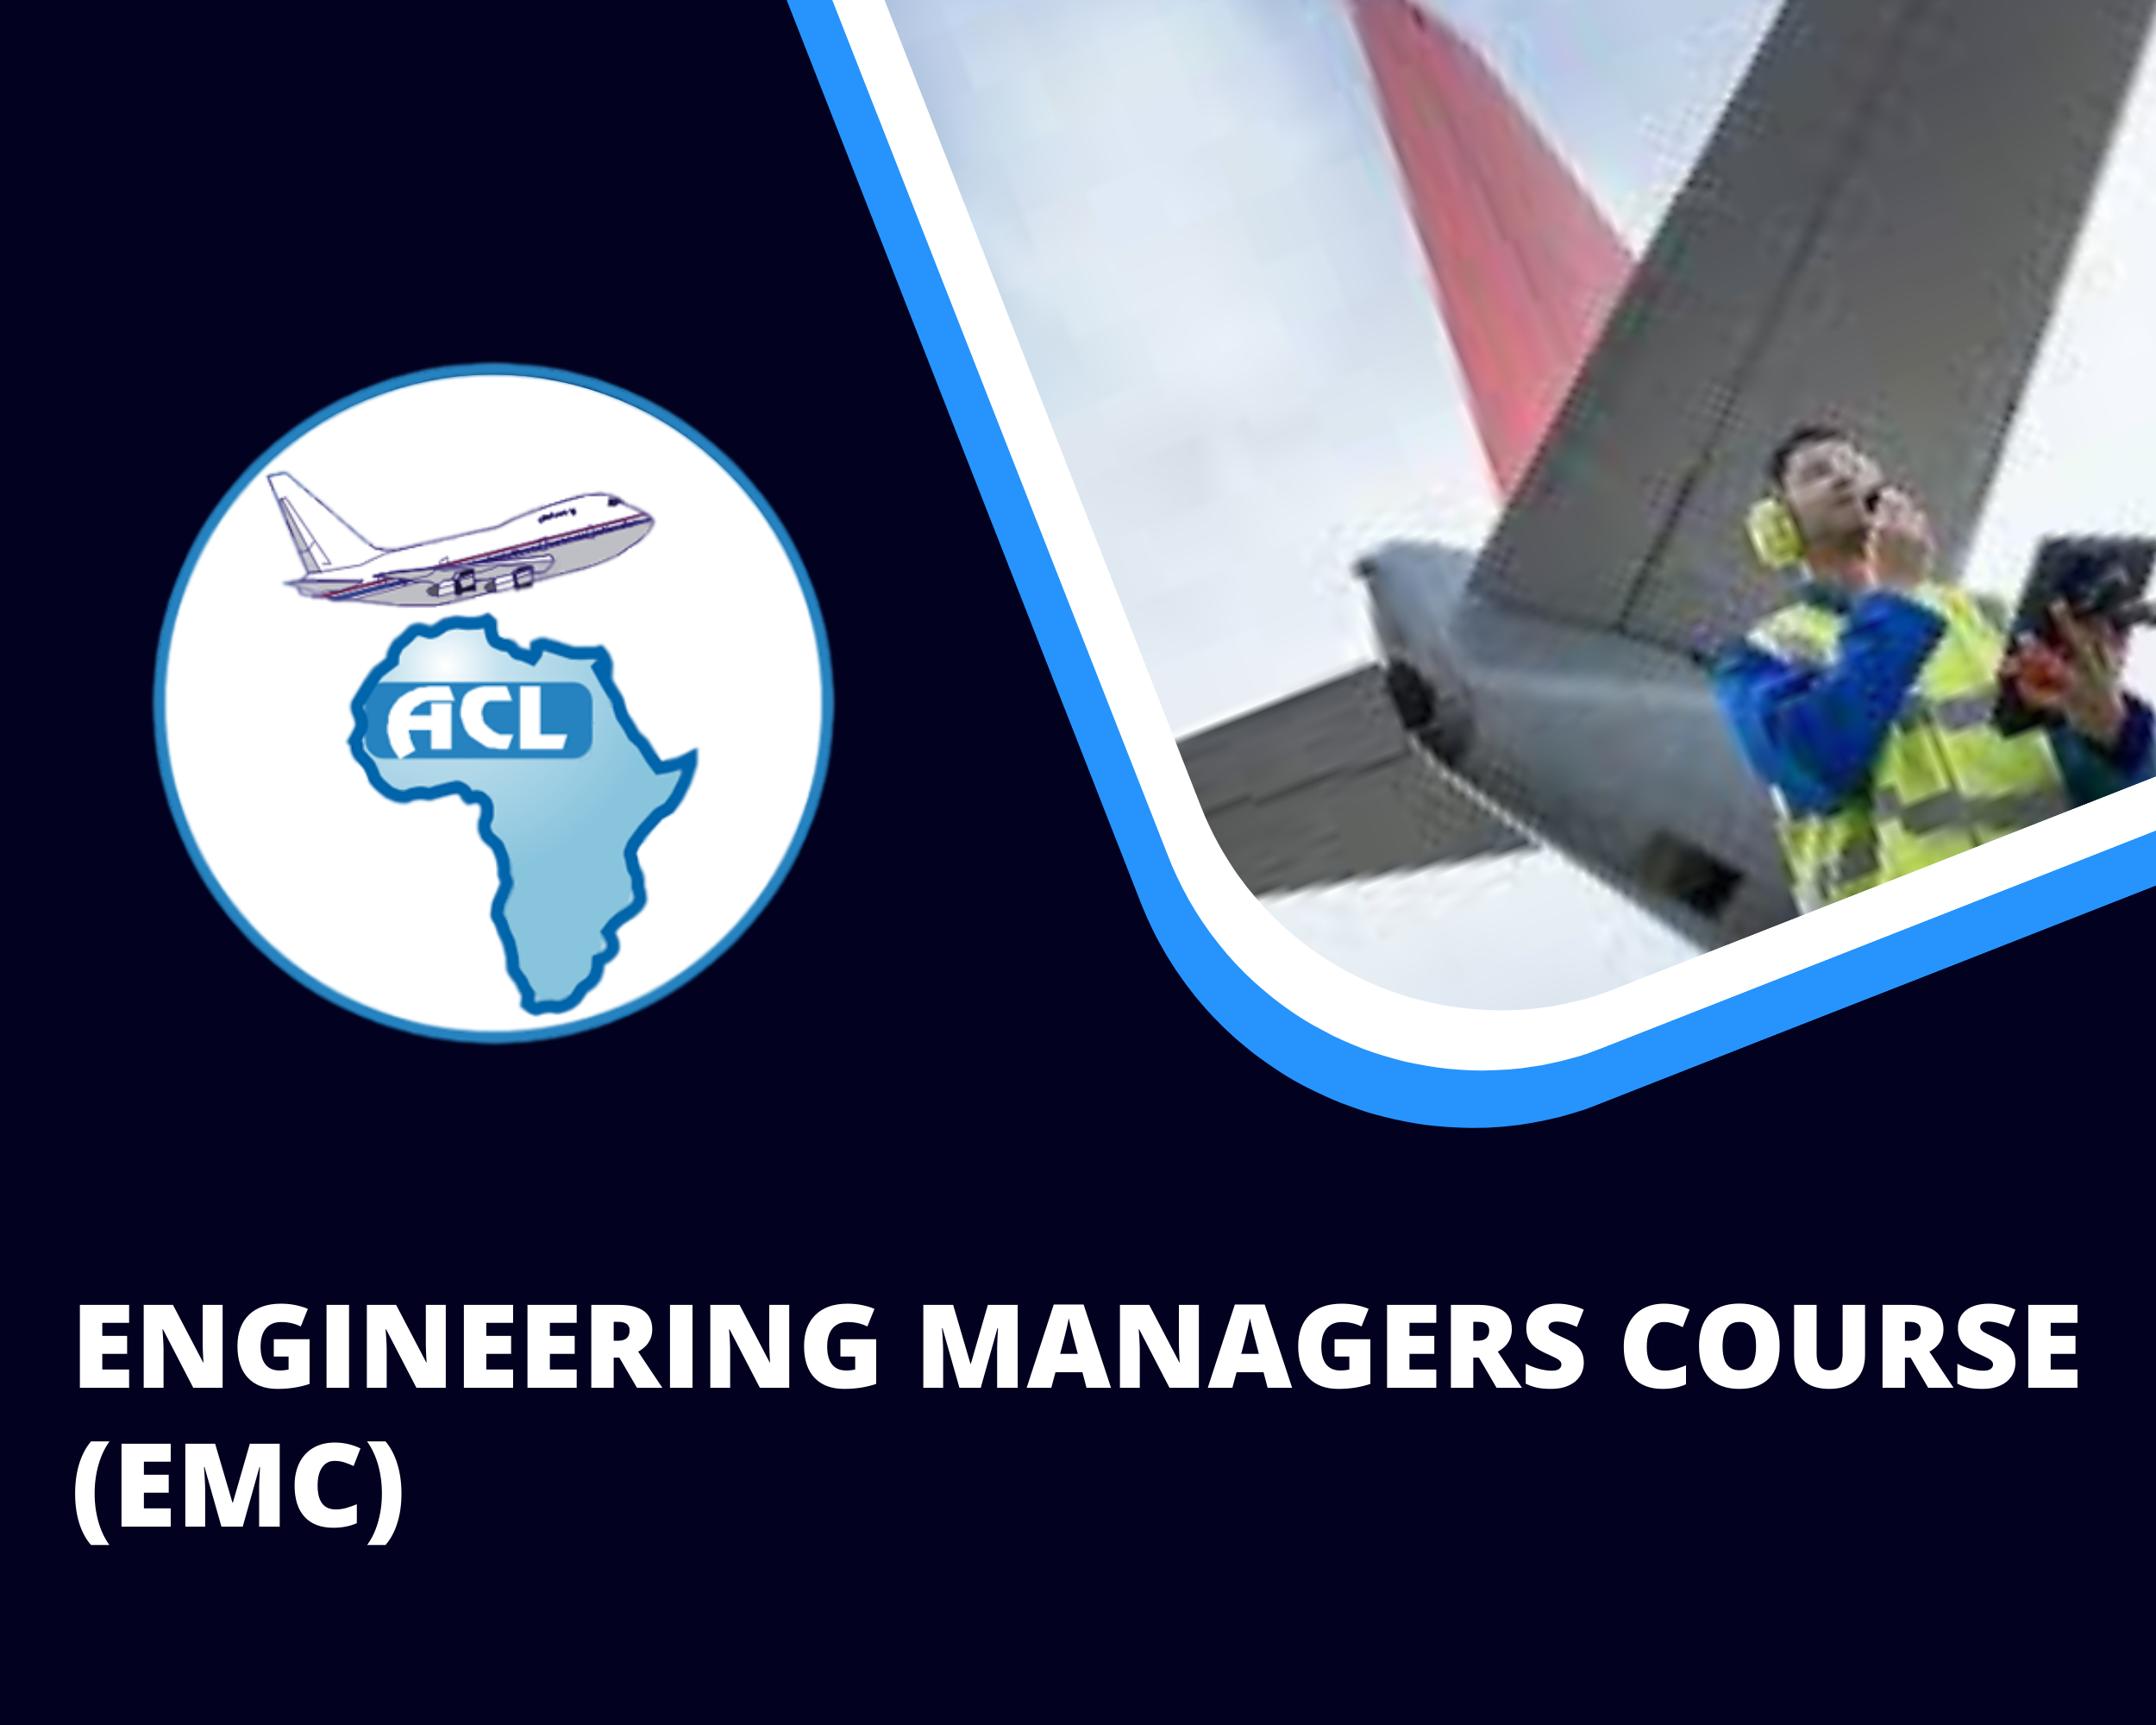 ENGINEERING MANAGERS COURSE (EMC)